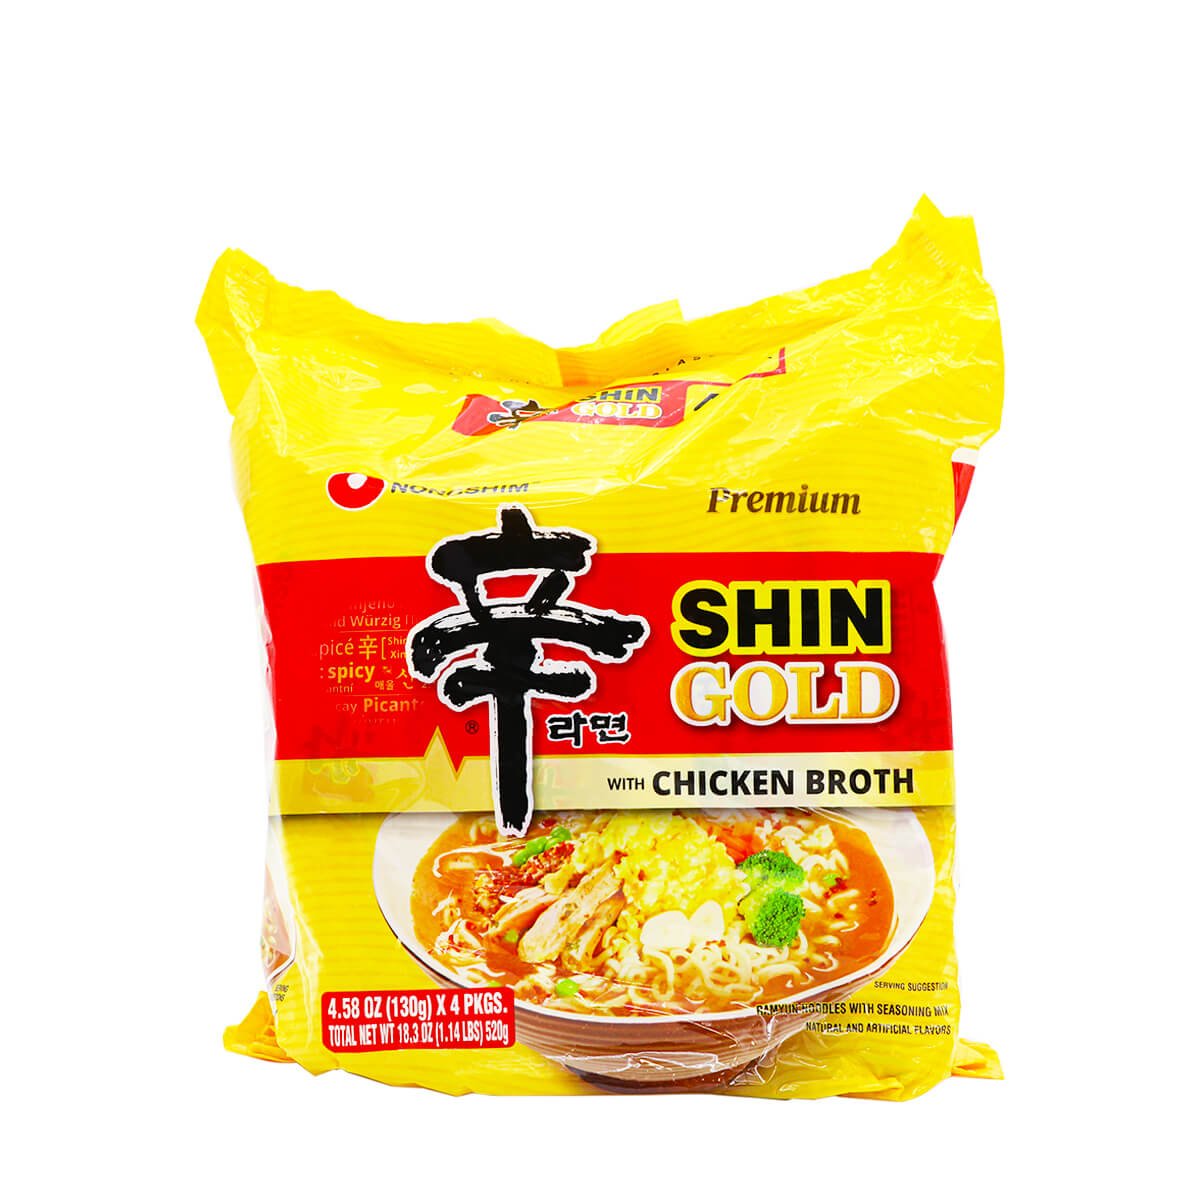 Nongshim Shin Gold Ramyun Noodle Soup with Chicken Broth, Gourmet Spicy,  3.56 oz, 6-count